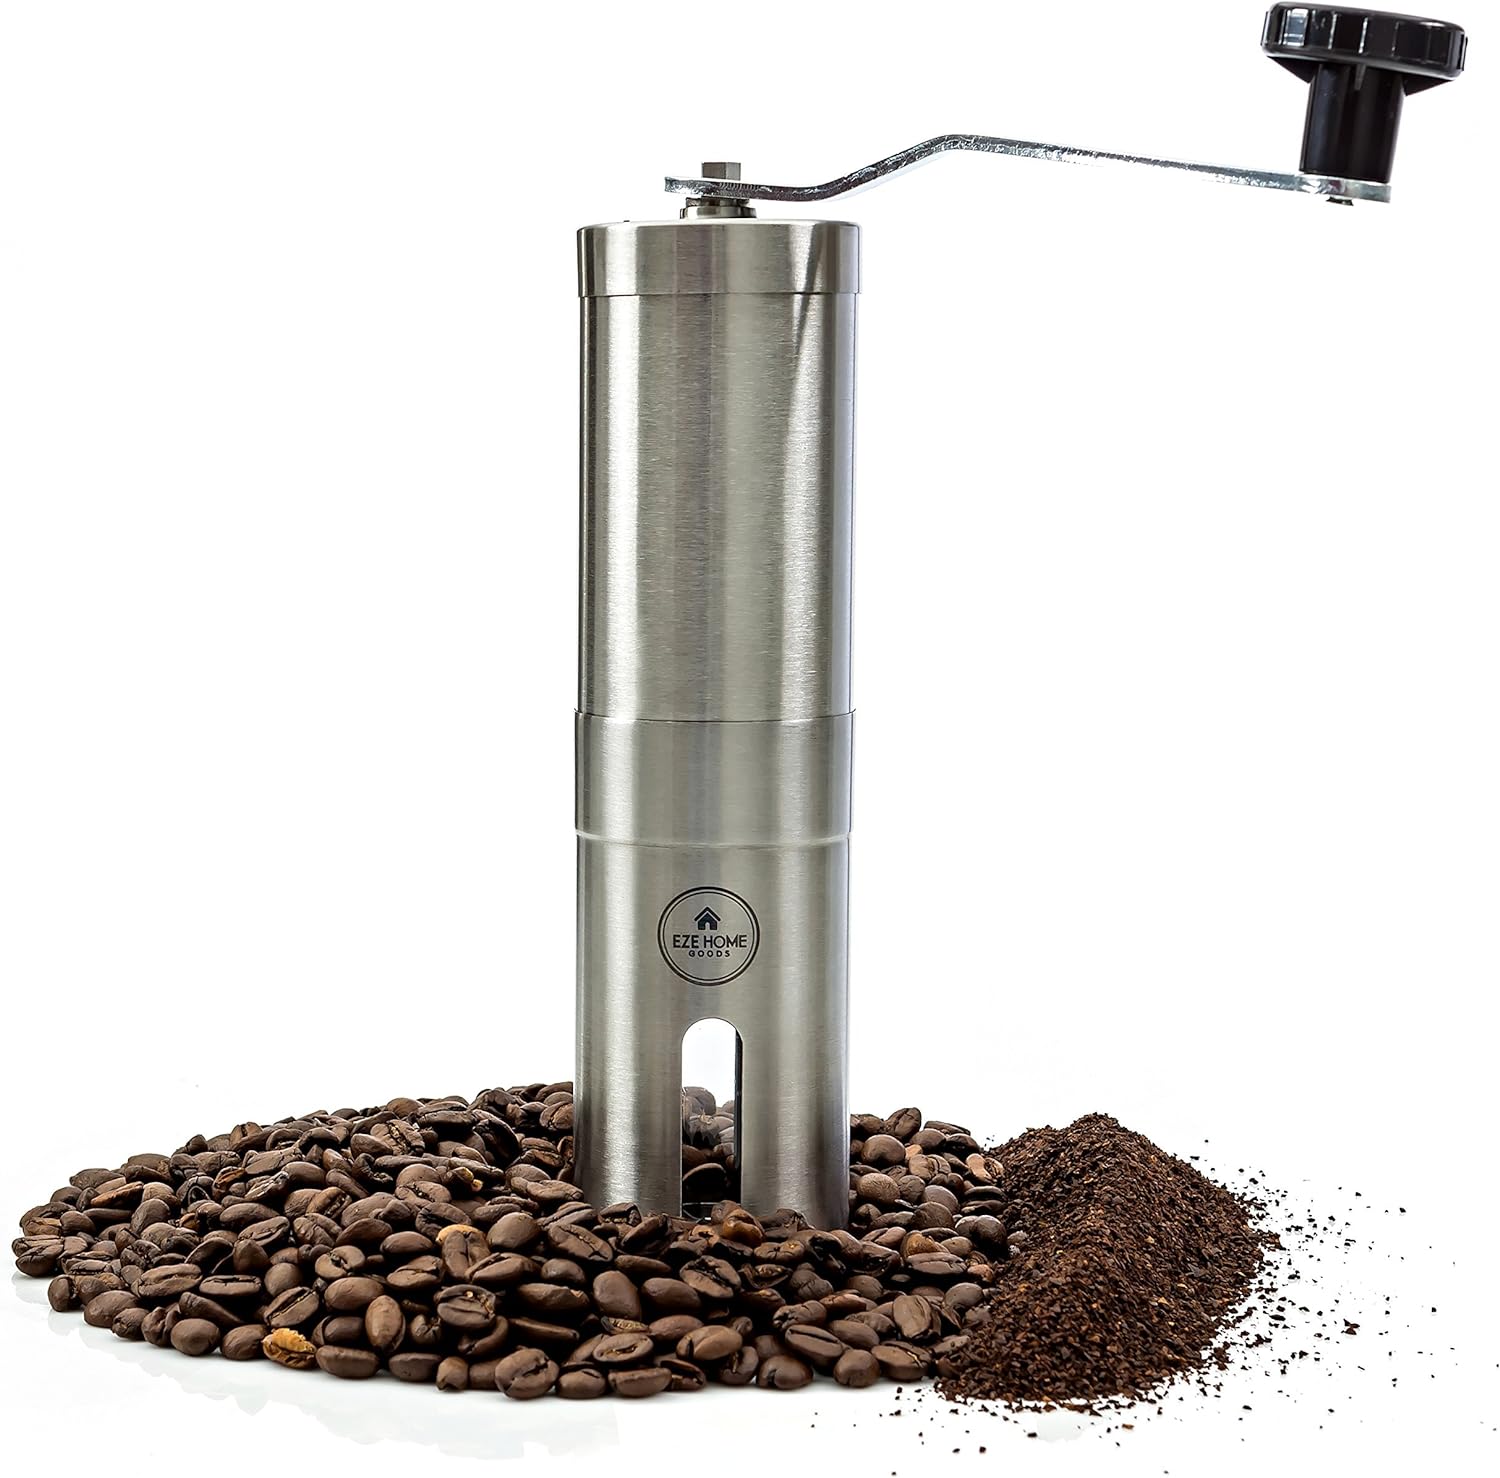 EZE Homegoods Hand Coffee Mill Grinder with Conical Ceramic Burr | Consistent Grind Every Time, Professional Grade, Stainless Steel, Lightweight and Portable, Heavy Duty Extra Long Hand Crank